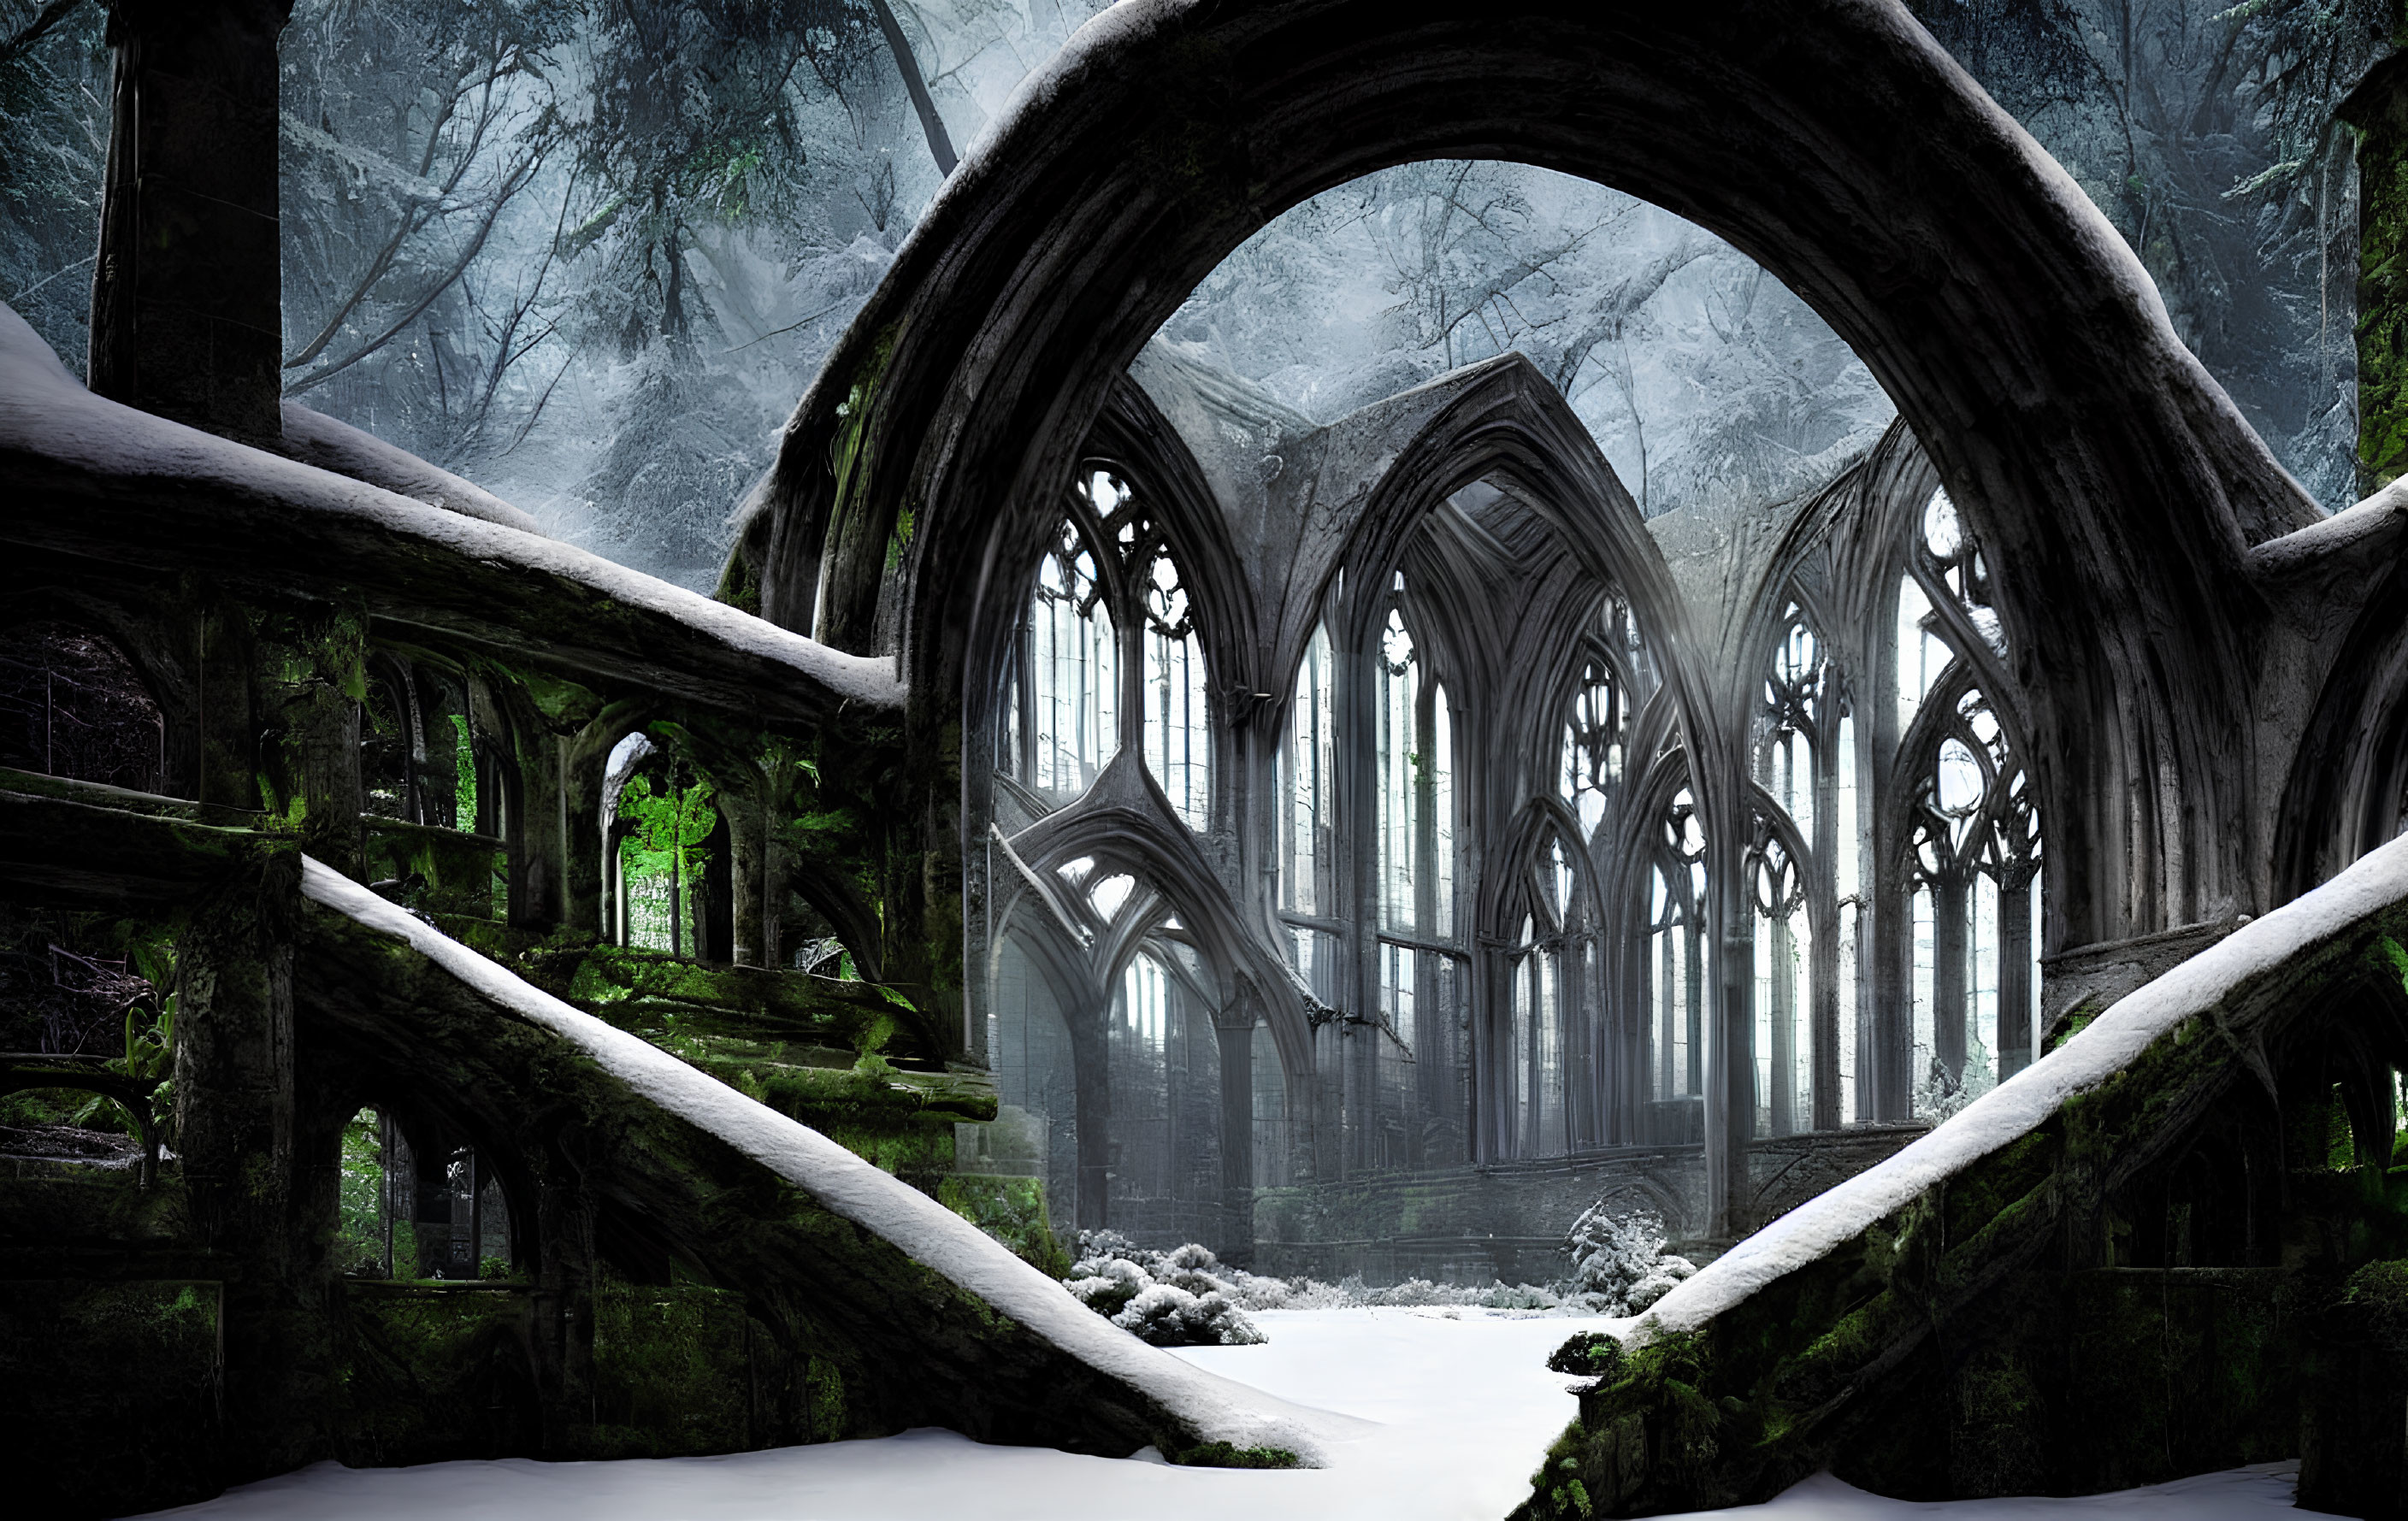 Gothic church ruins in snow-covered winter forest